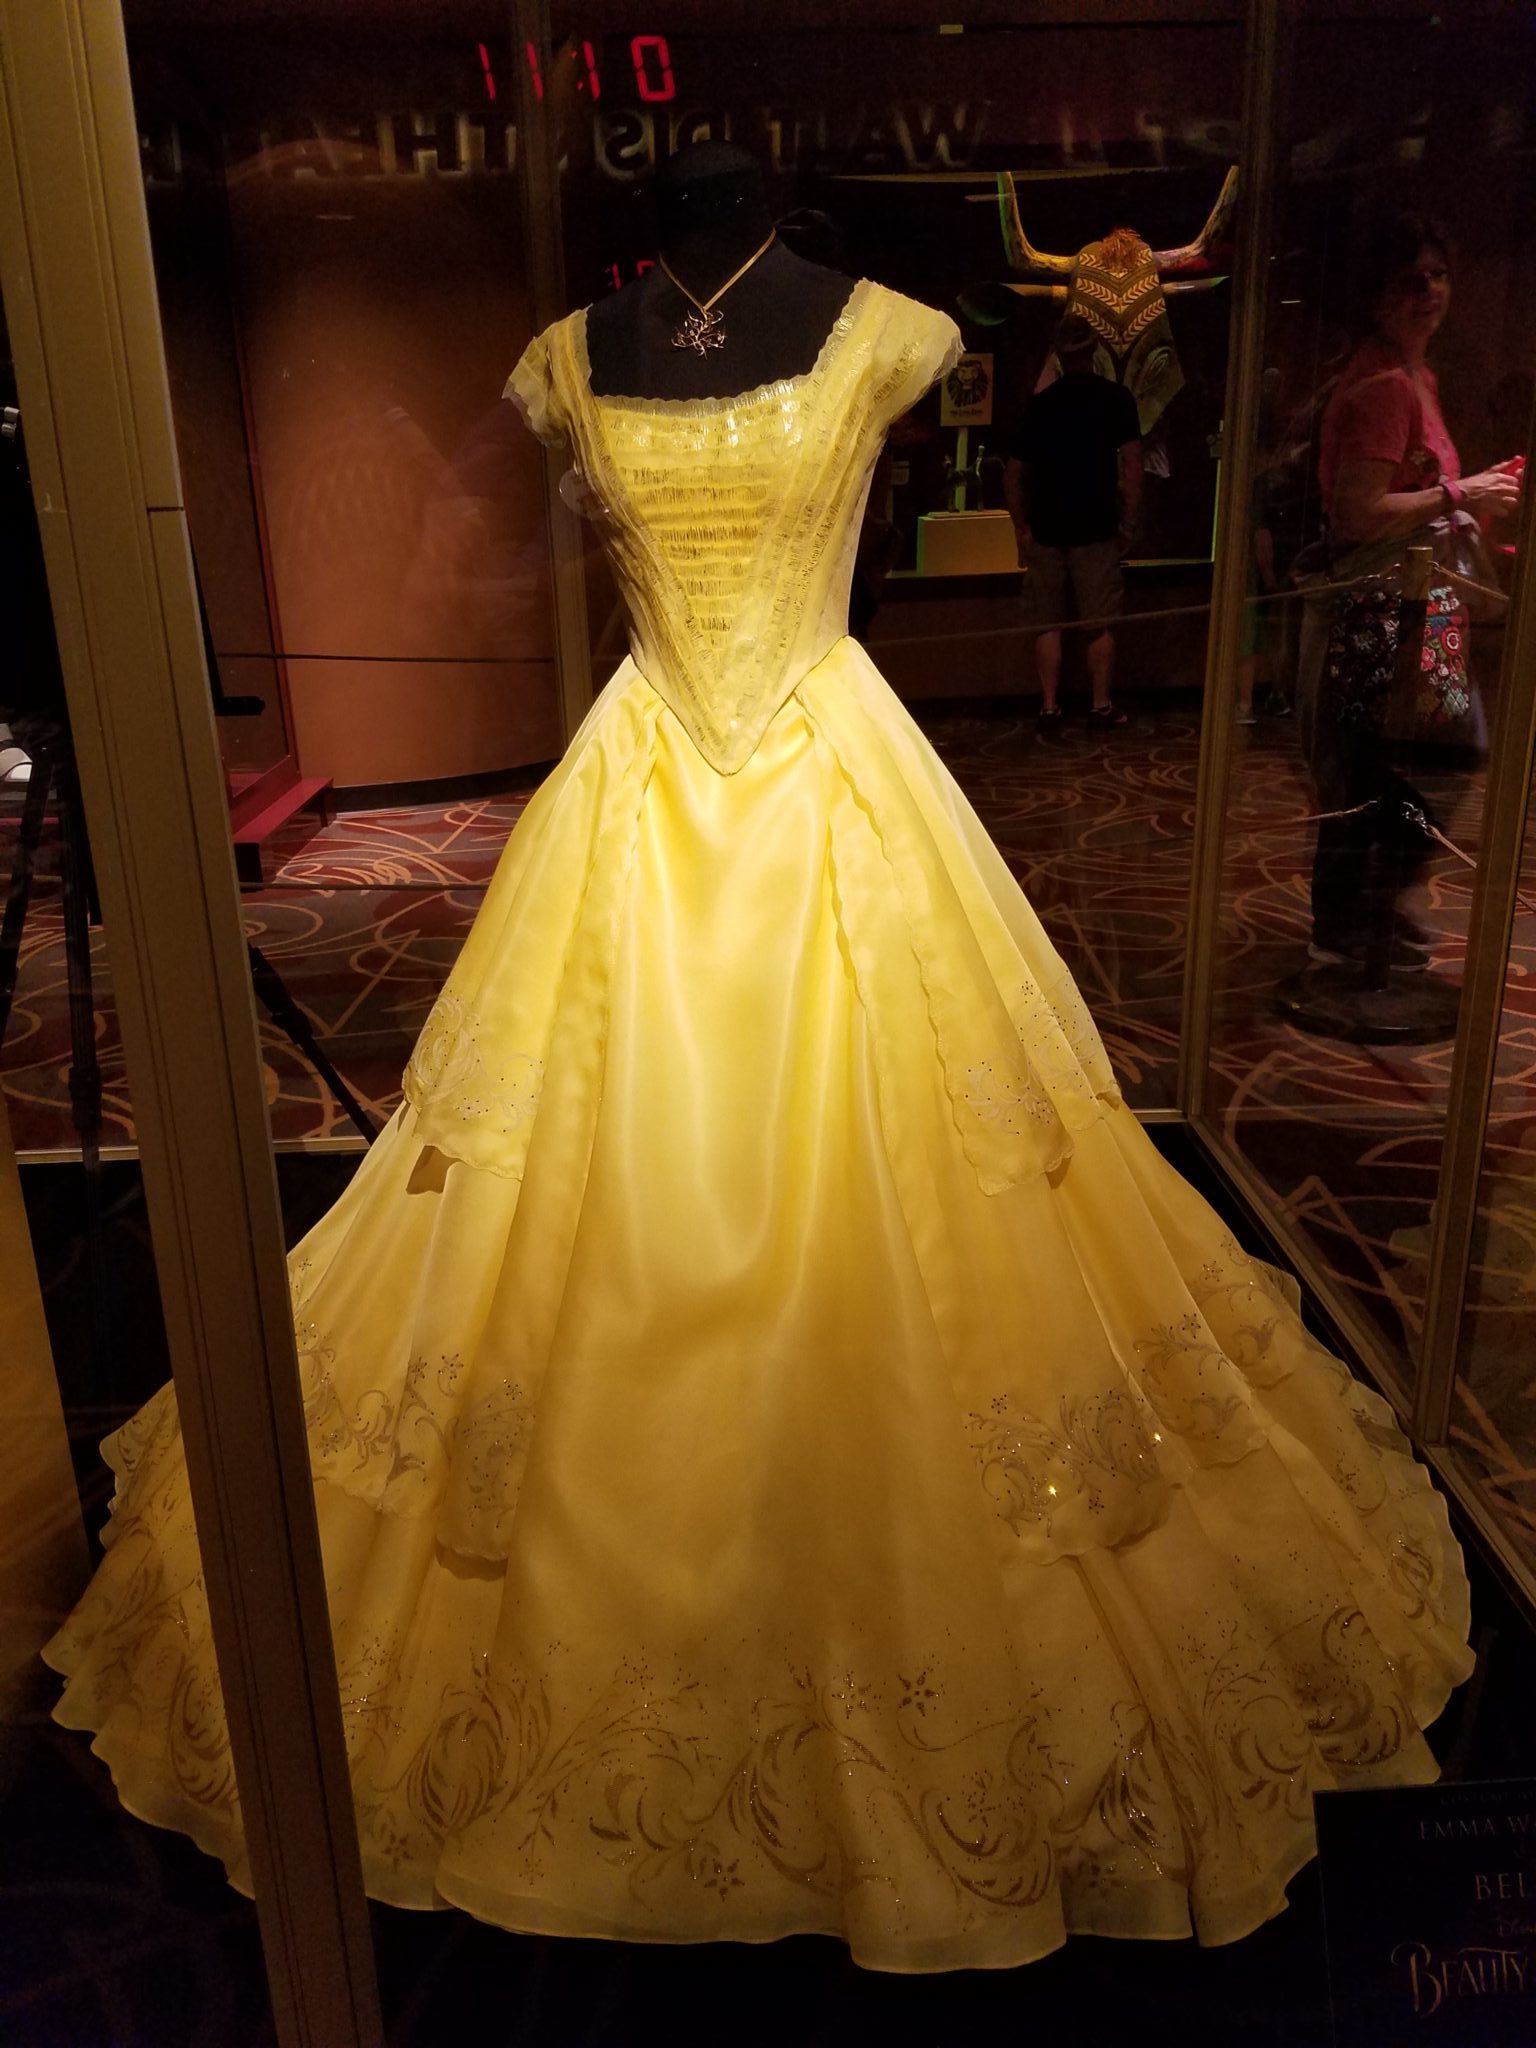 Beauty and the Beast Sneak Peek and Costume Dress On Display at One Man ...